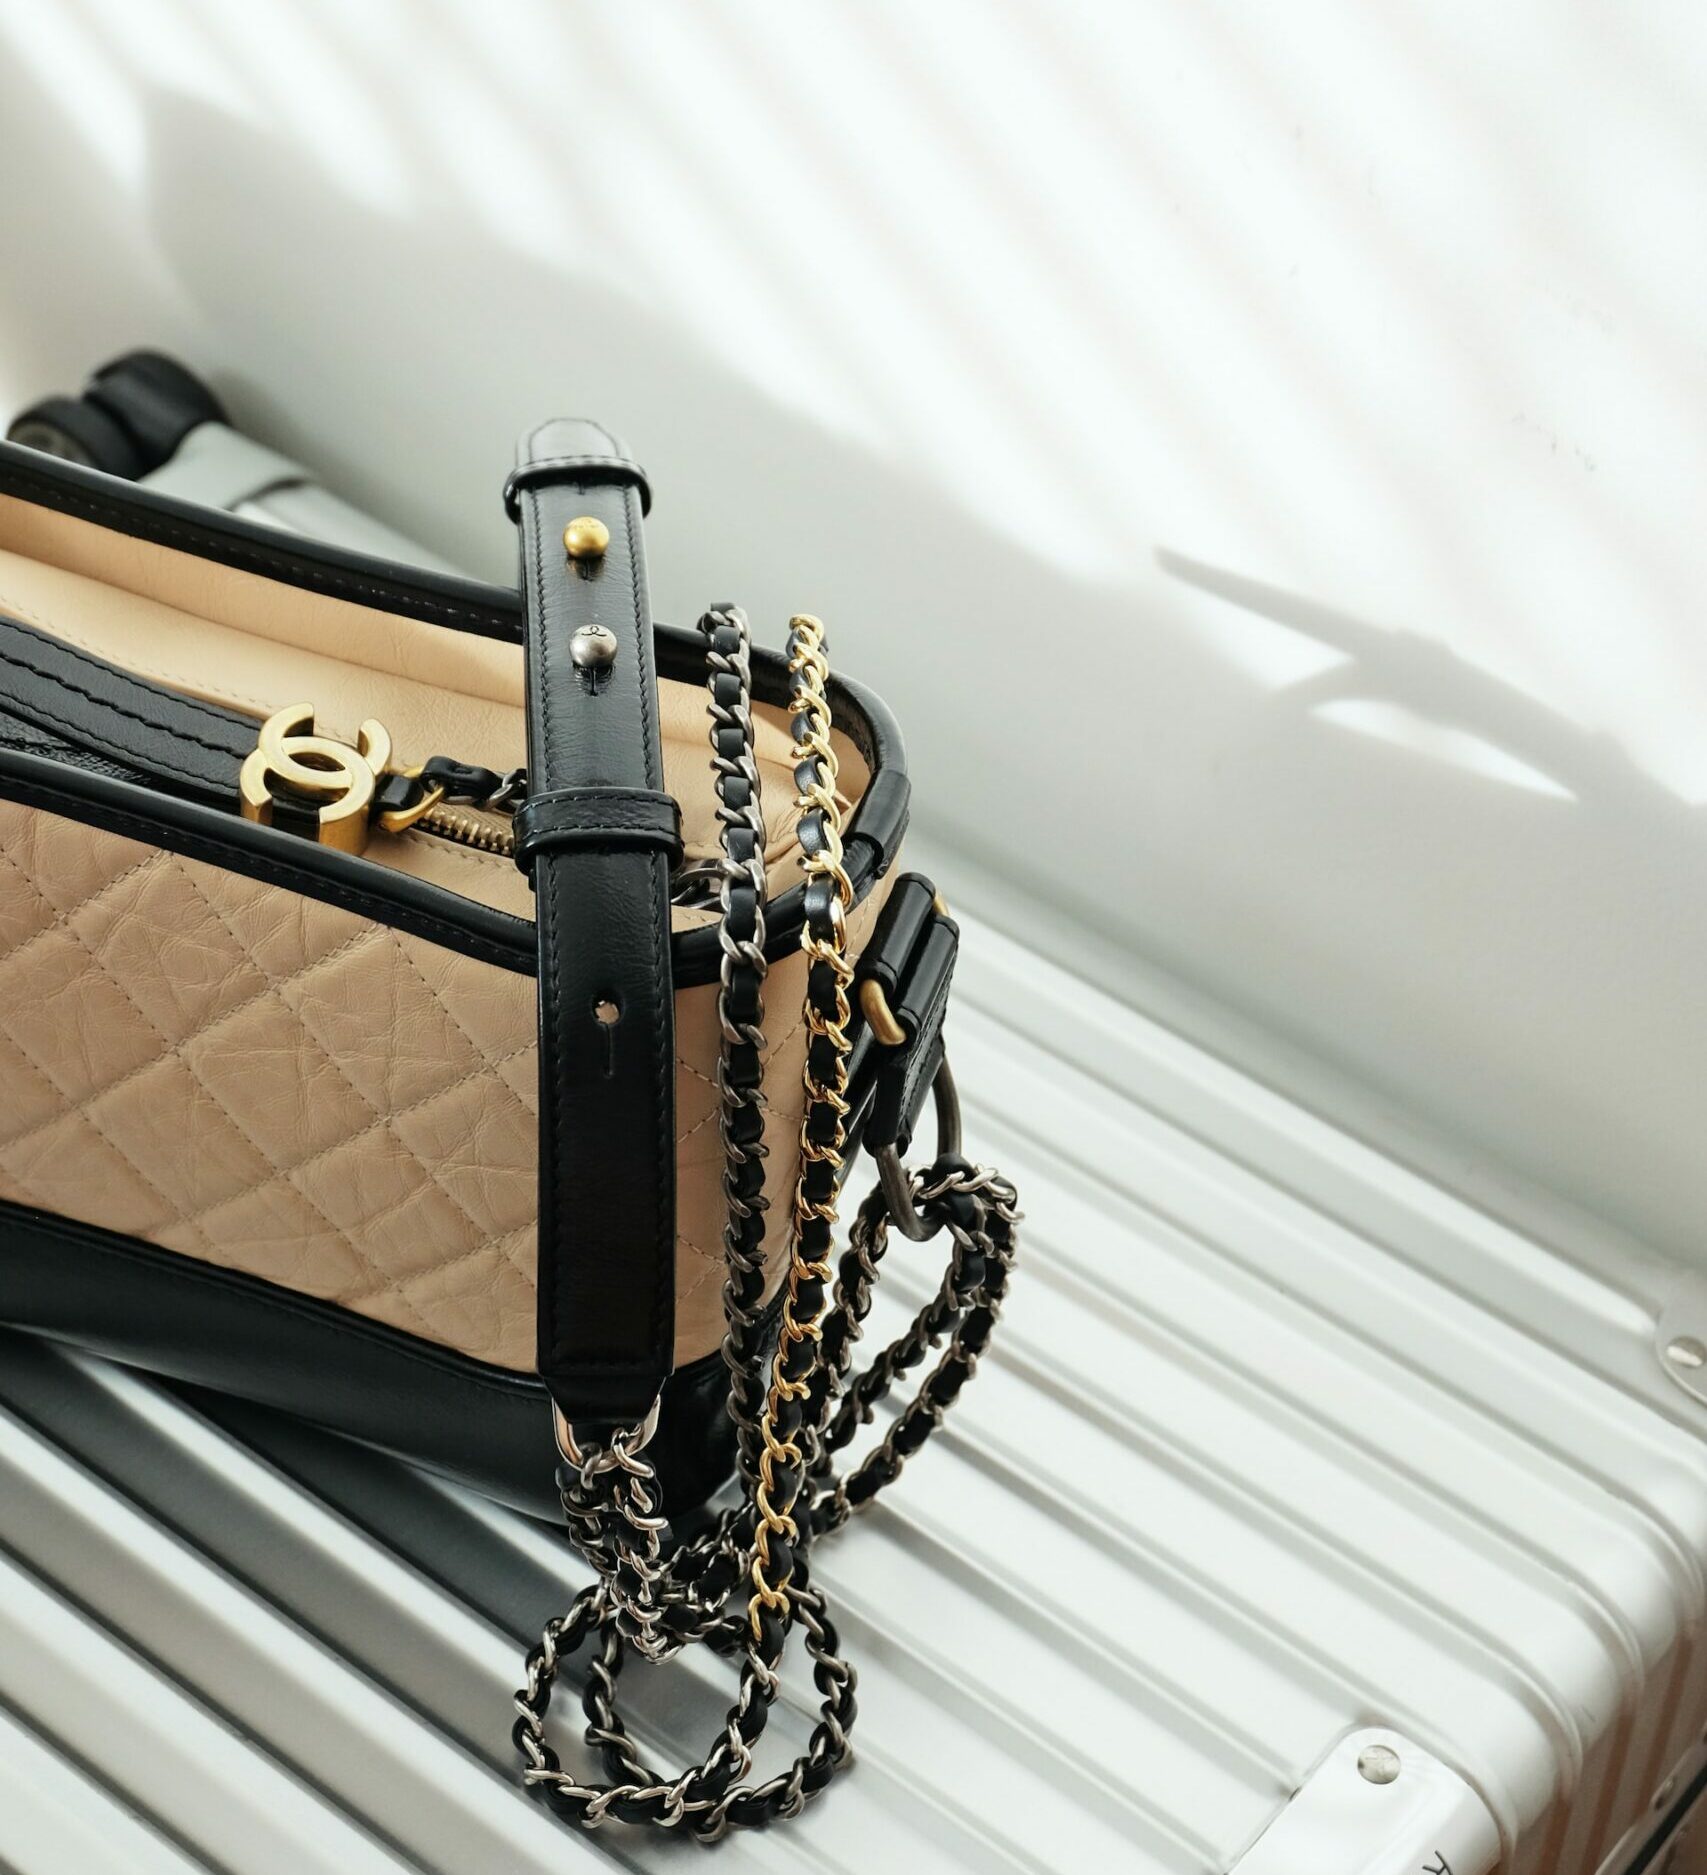 Get The Inside Scoop On The Making Of a Chanel Handbag